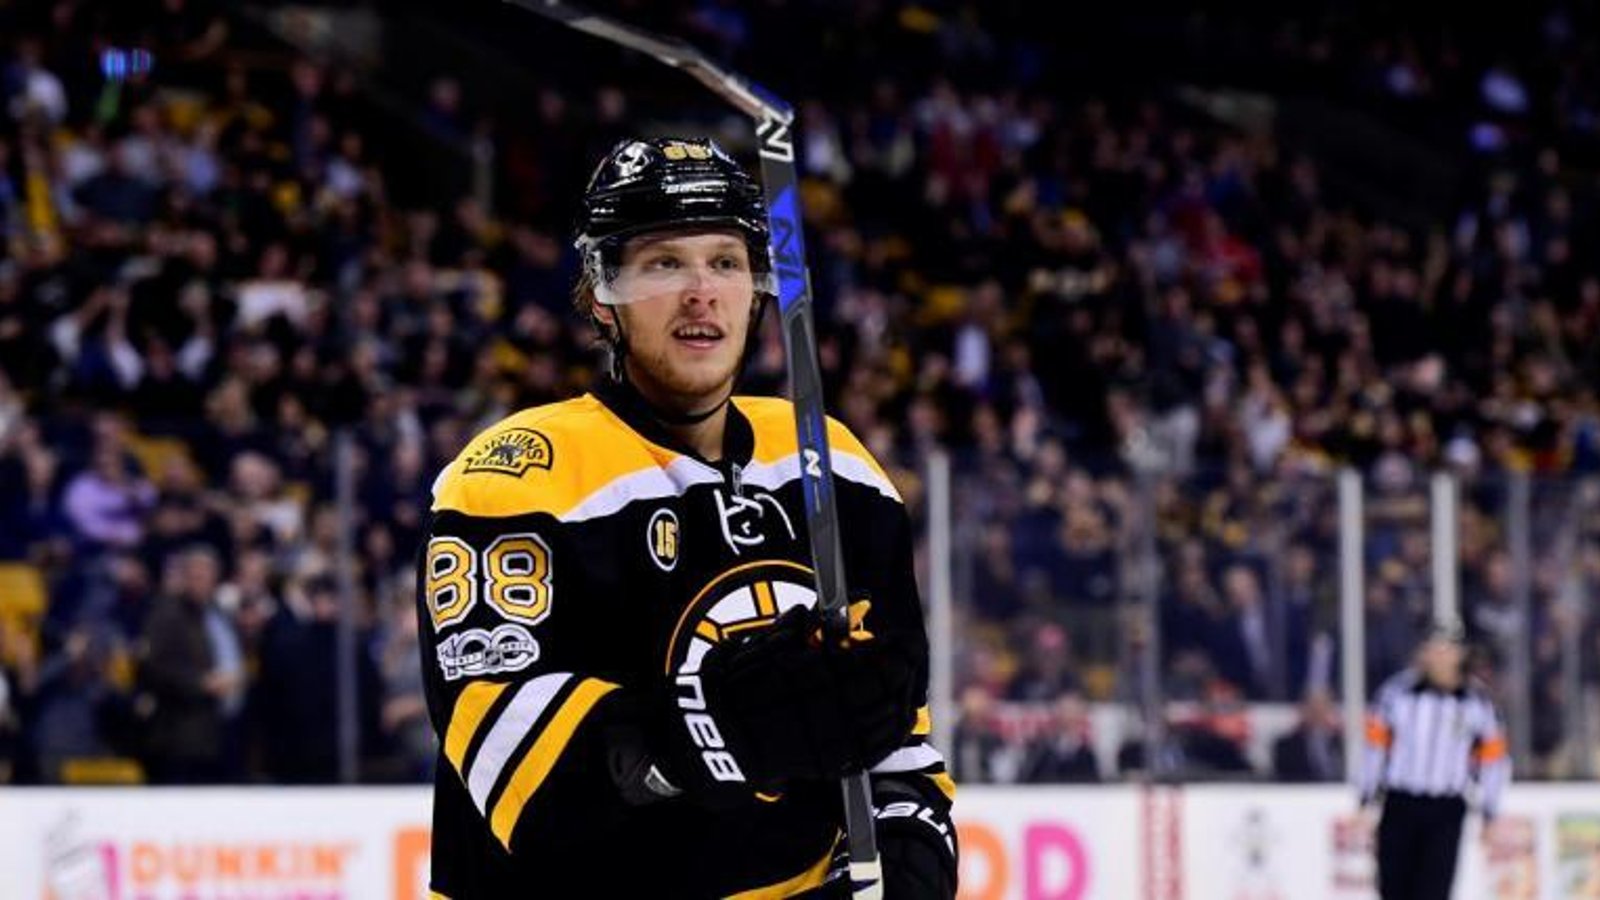 Watch all of Pastrnak's goals from last season